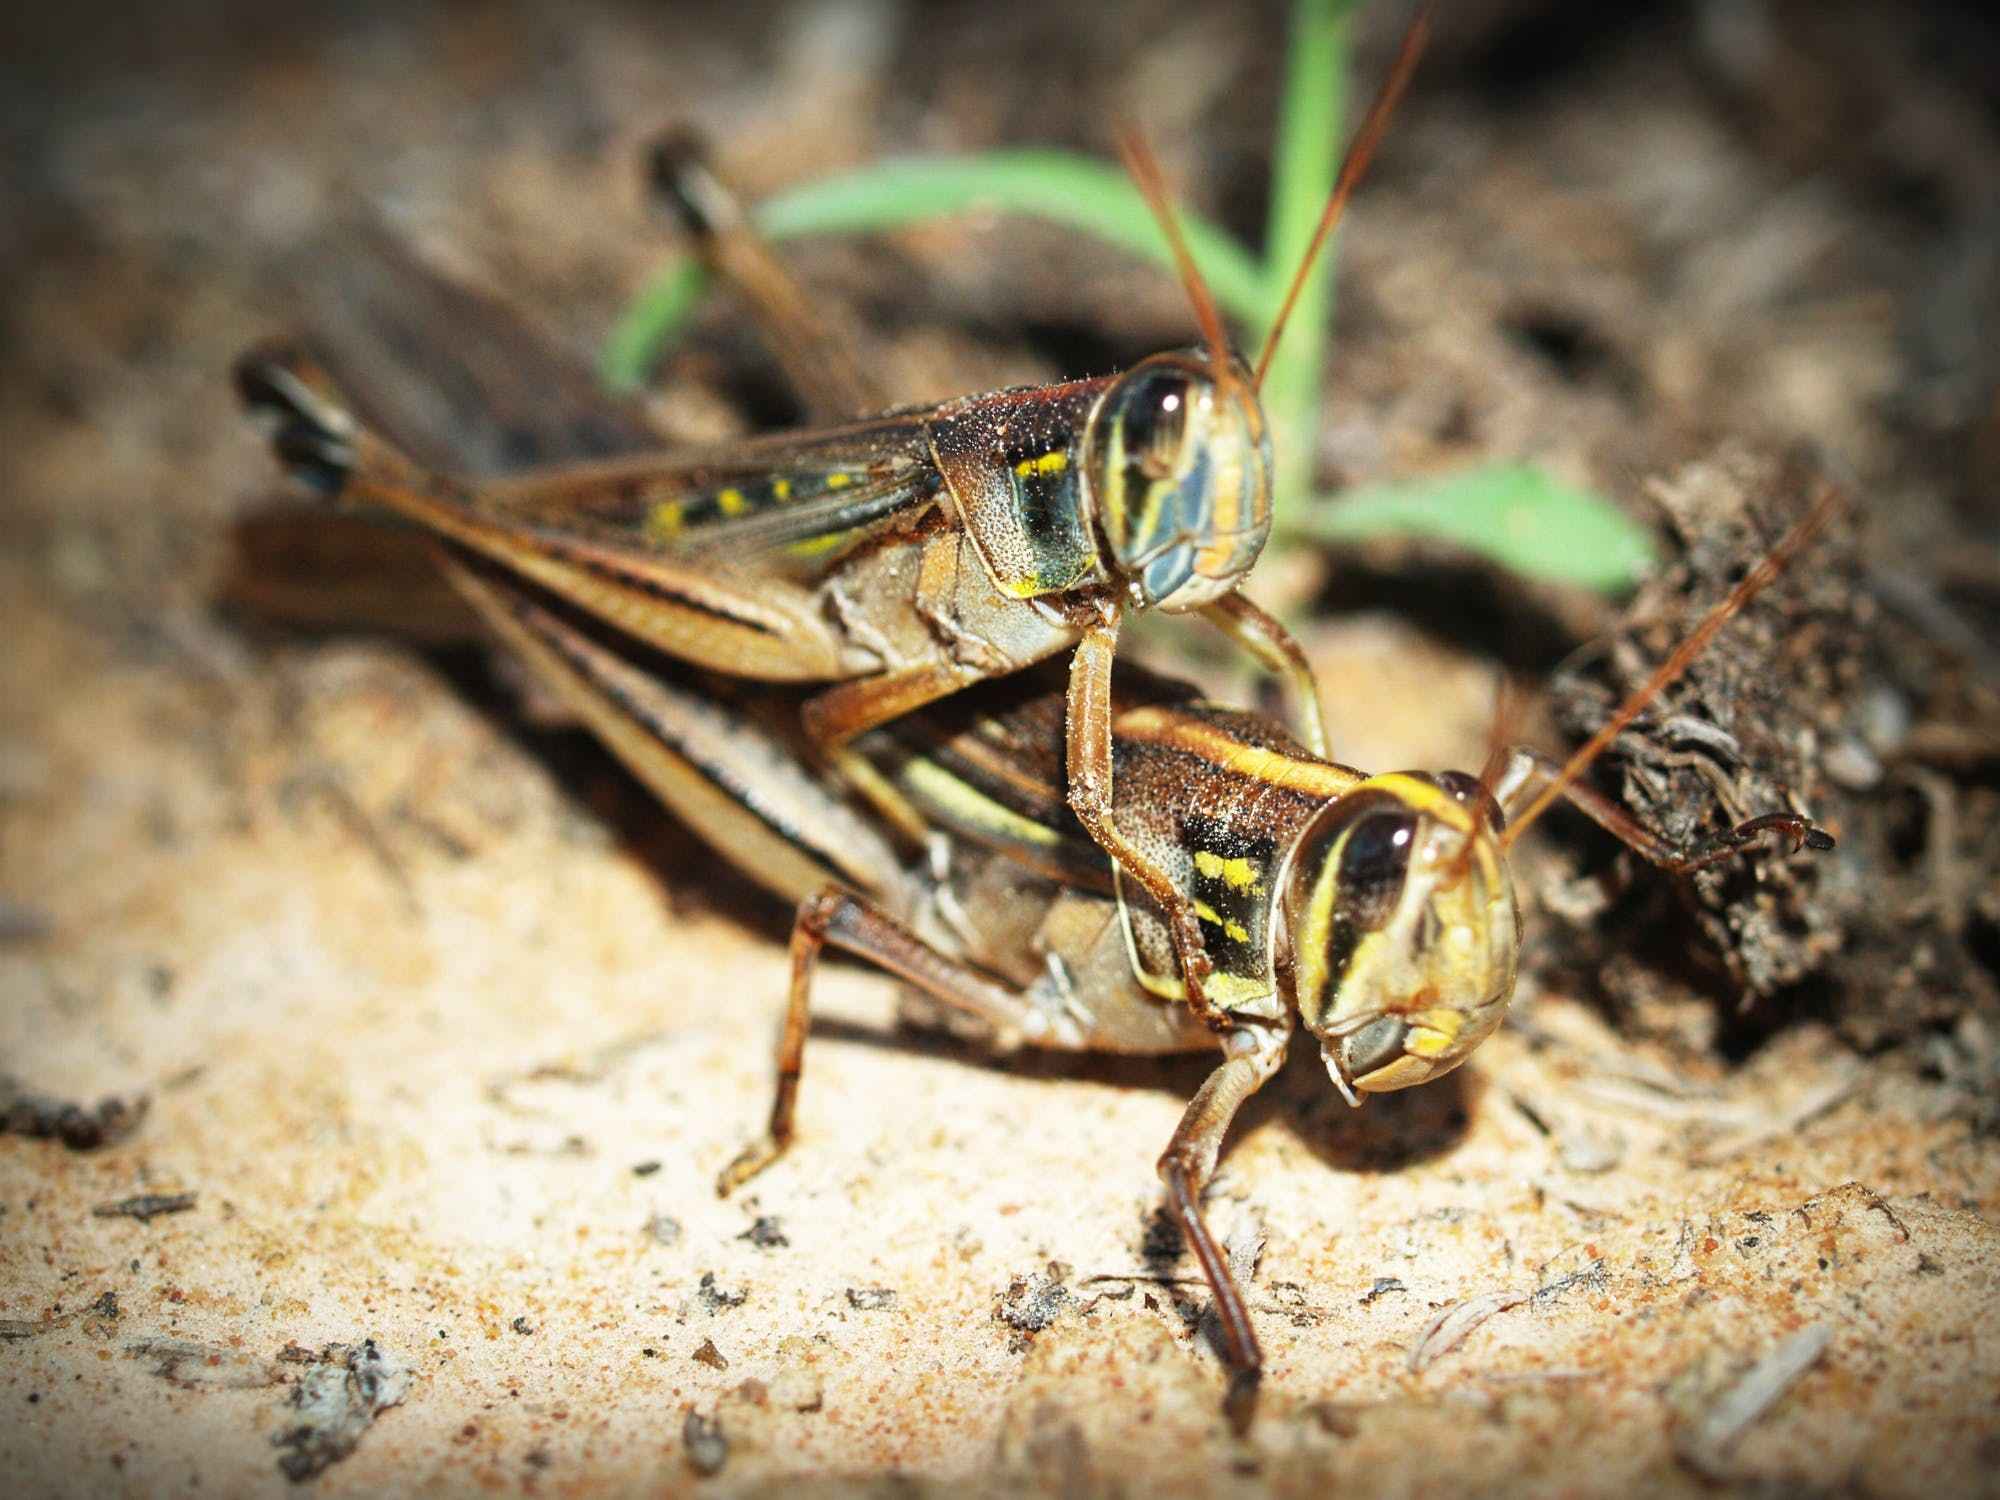 Grasshoppers can showcase their wings to attract mates!